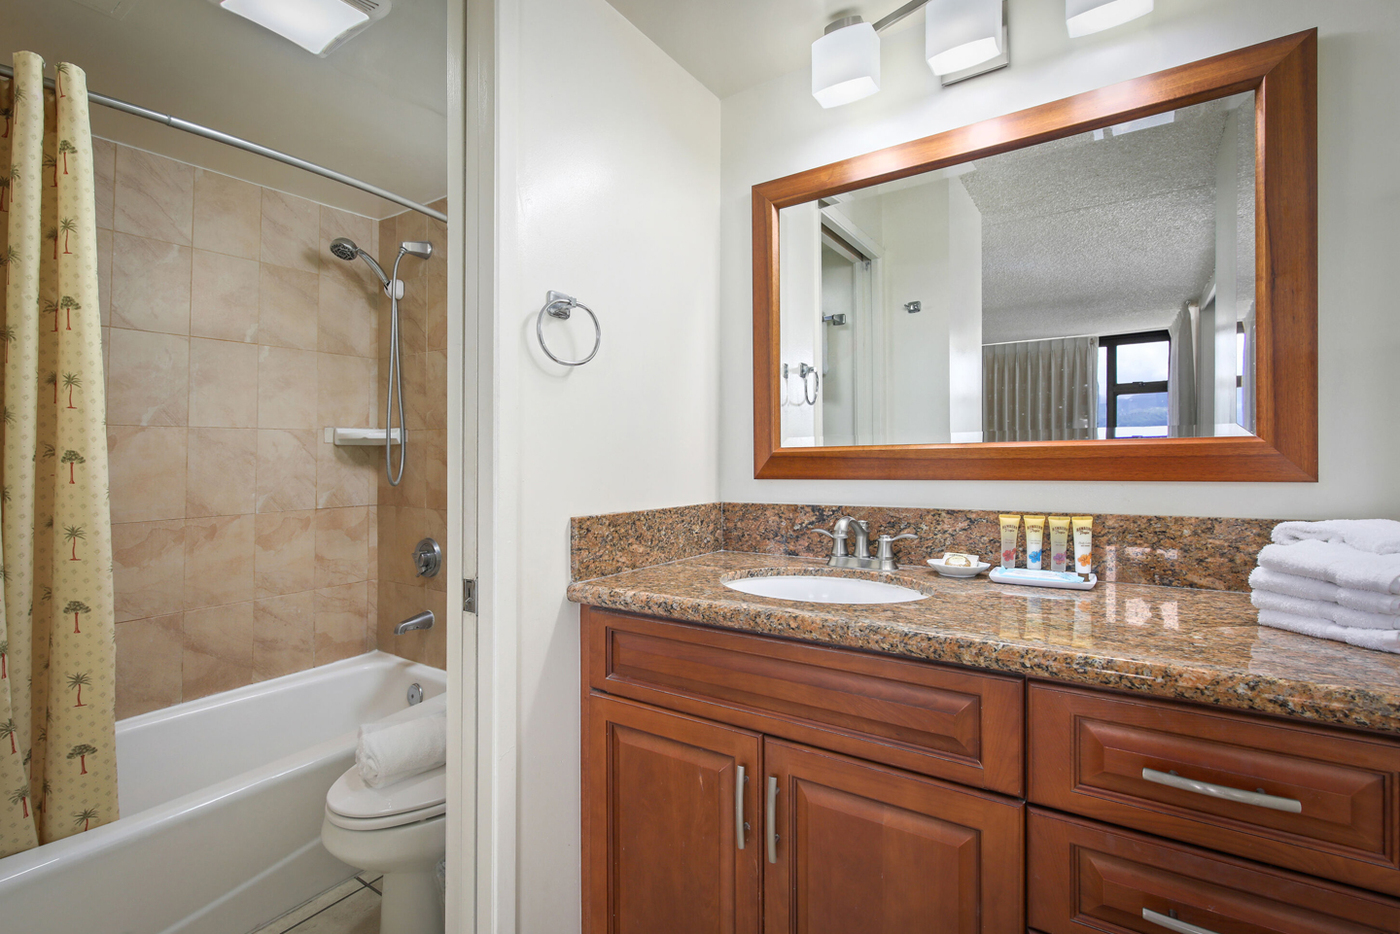 1-Bedroom Deluxe Mounatin View Bathroom with sink, shower/bathtub combo, and toilet.